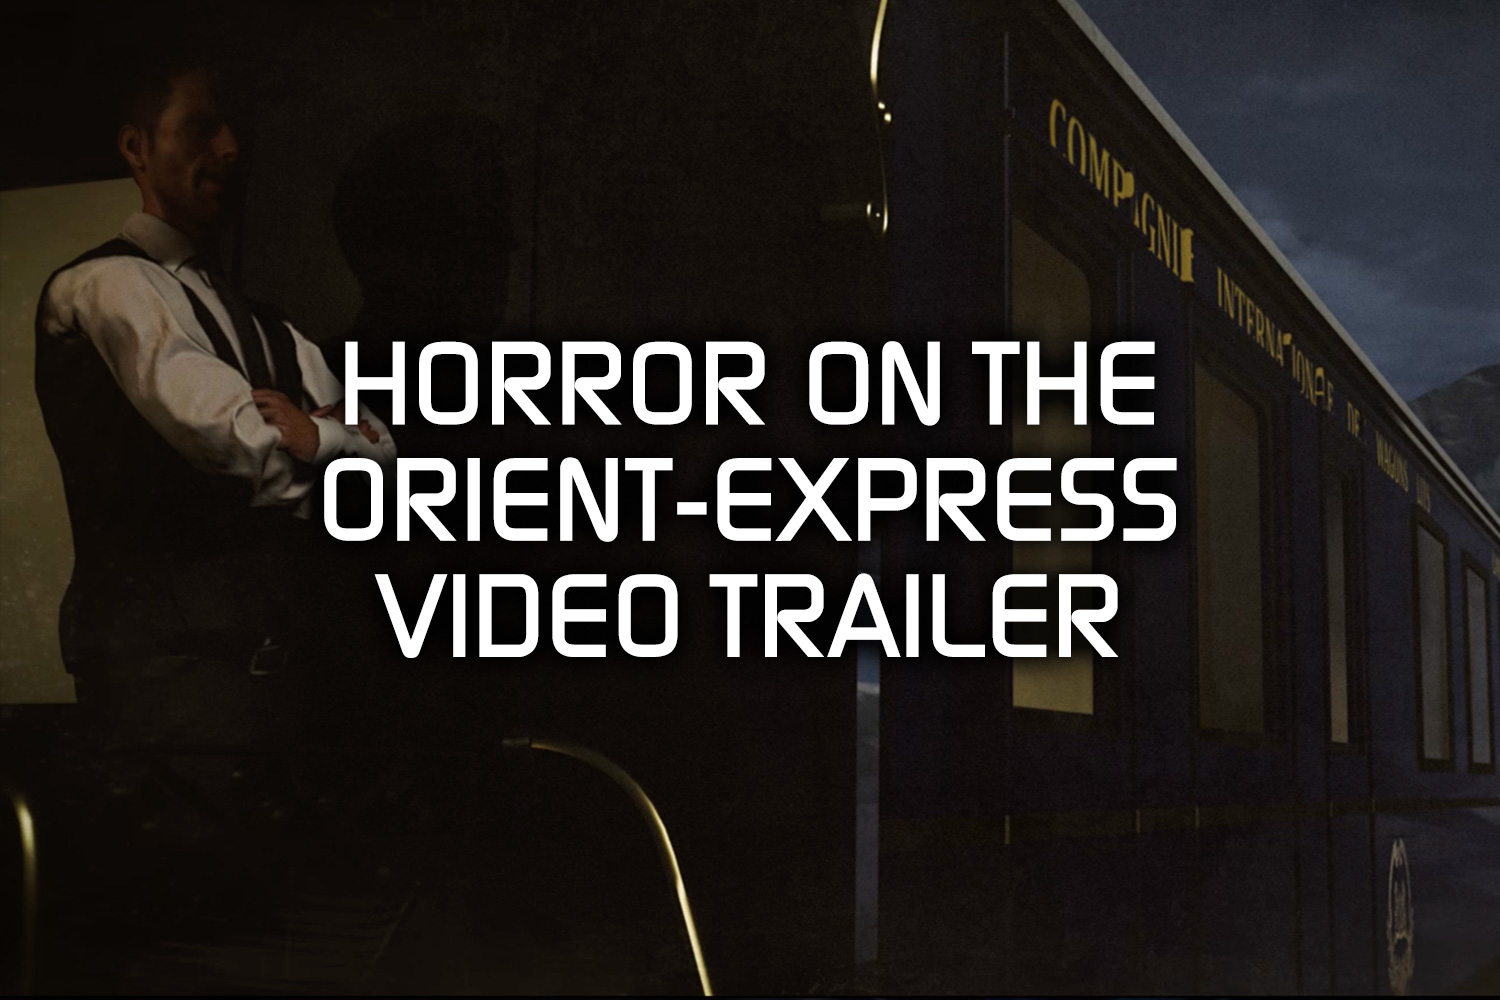 HORROR ON THE ORIENT-EXPRESS TRAILER